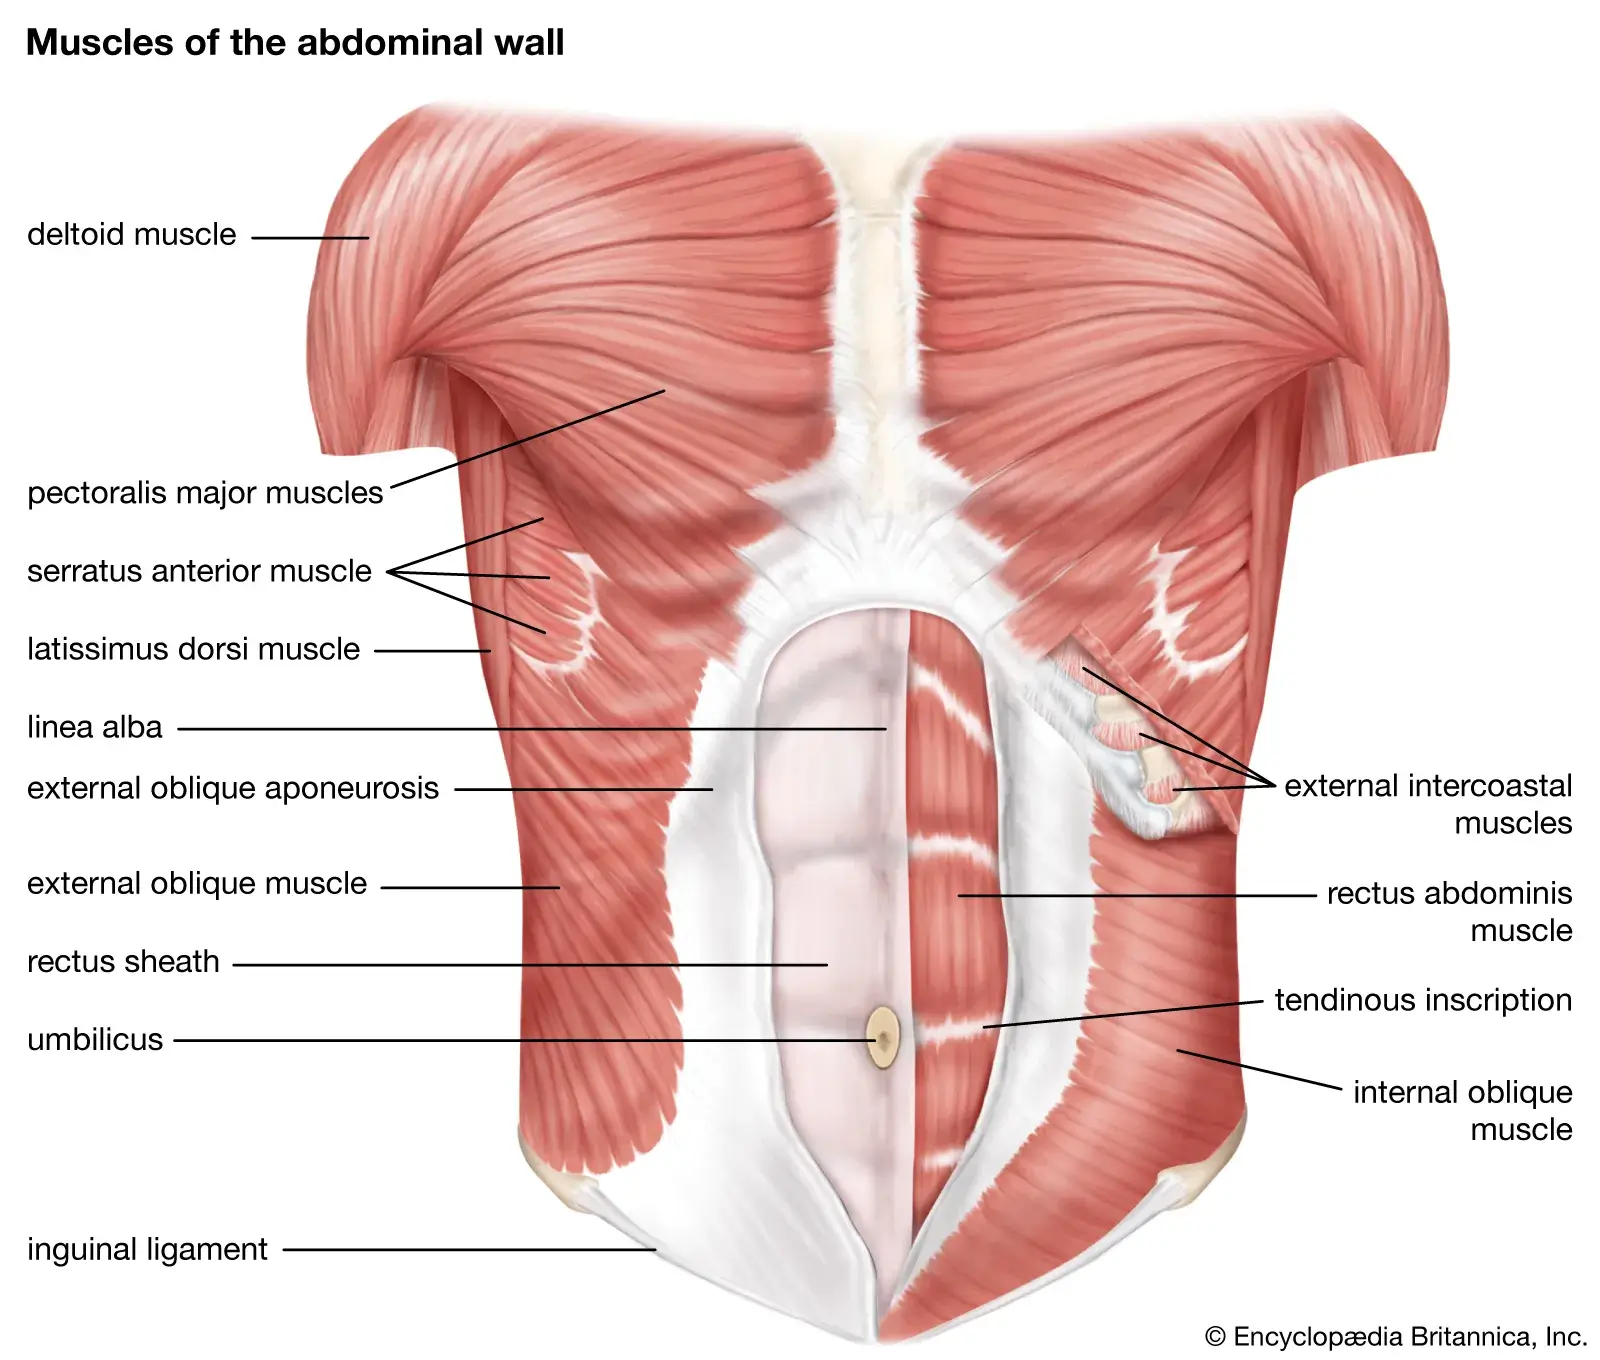 Midsection muscles